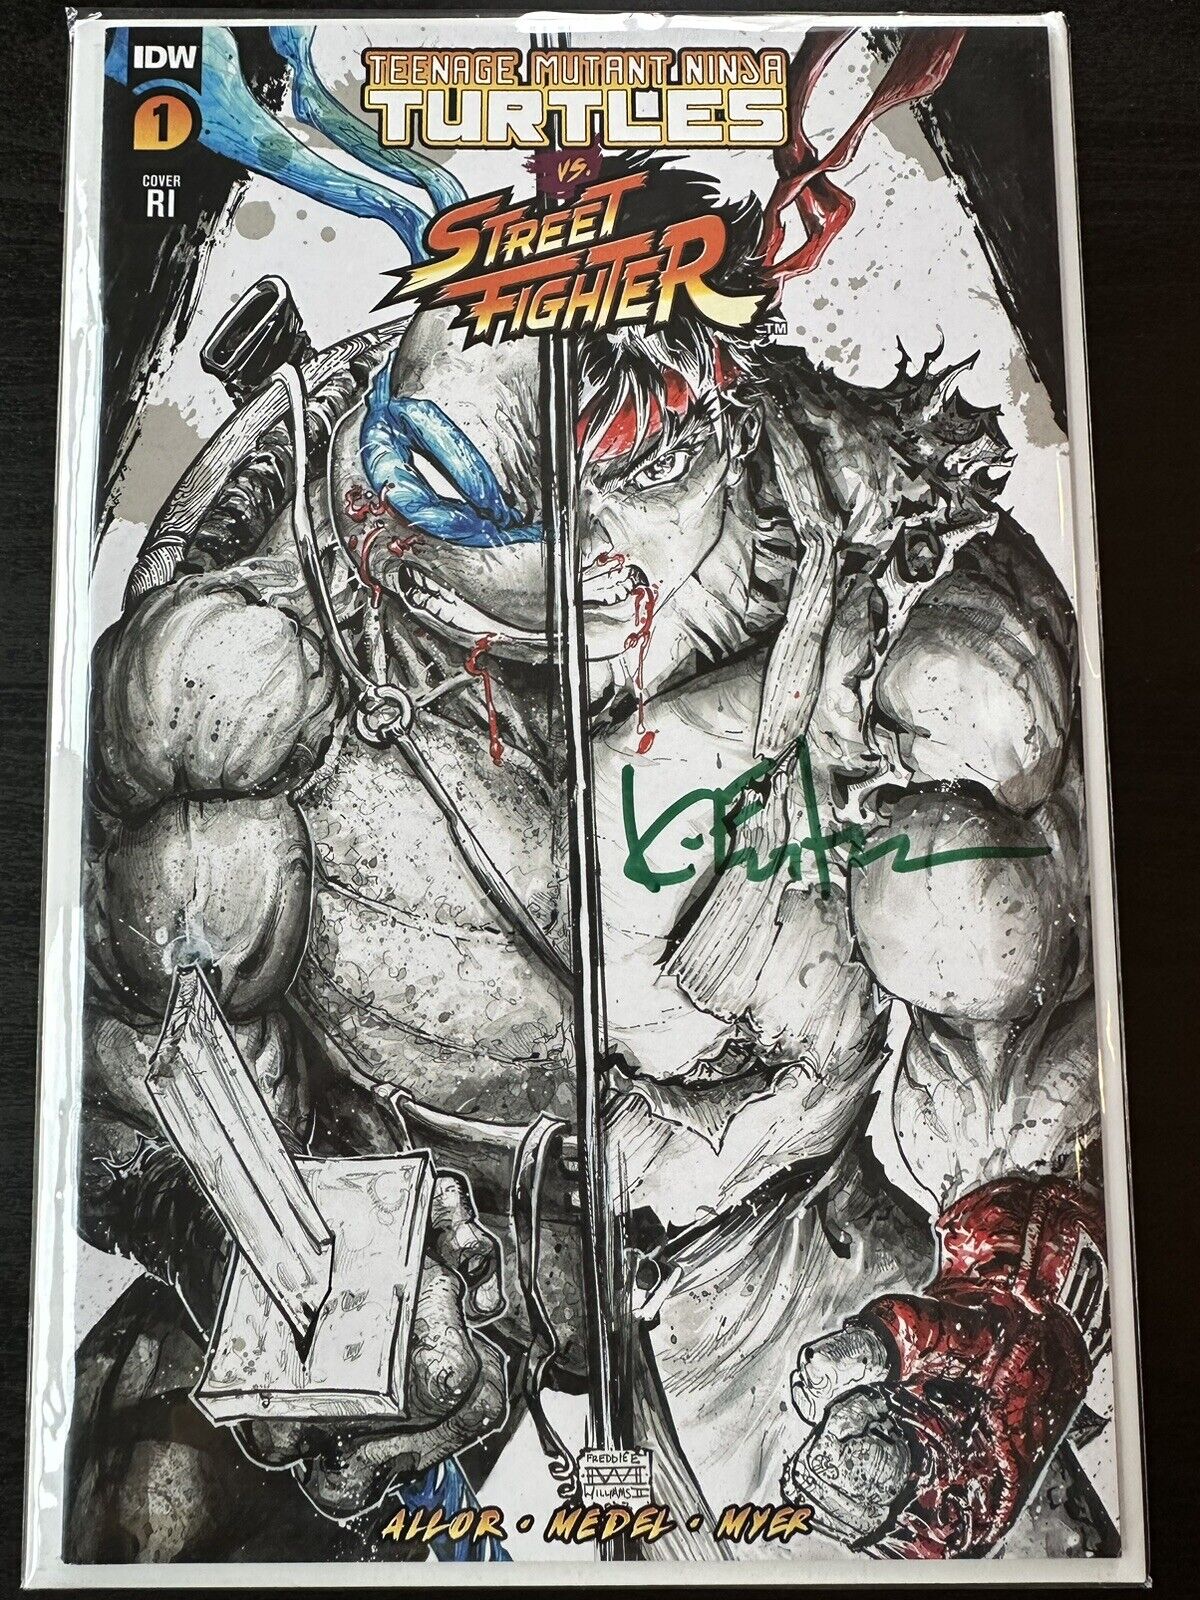 TMNT vs STREET FIGHTER #1 Williams 1:100 Incentive Variant SIGNED by Eastman COA